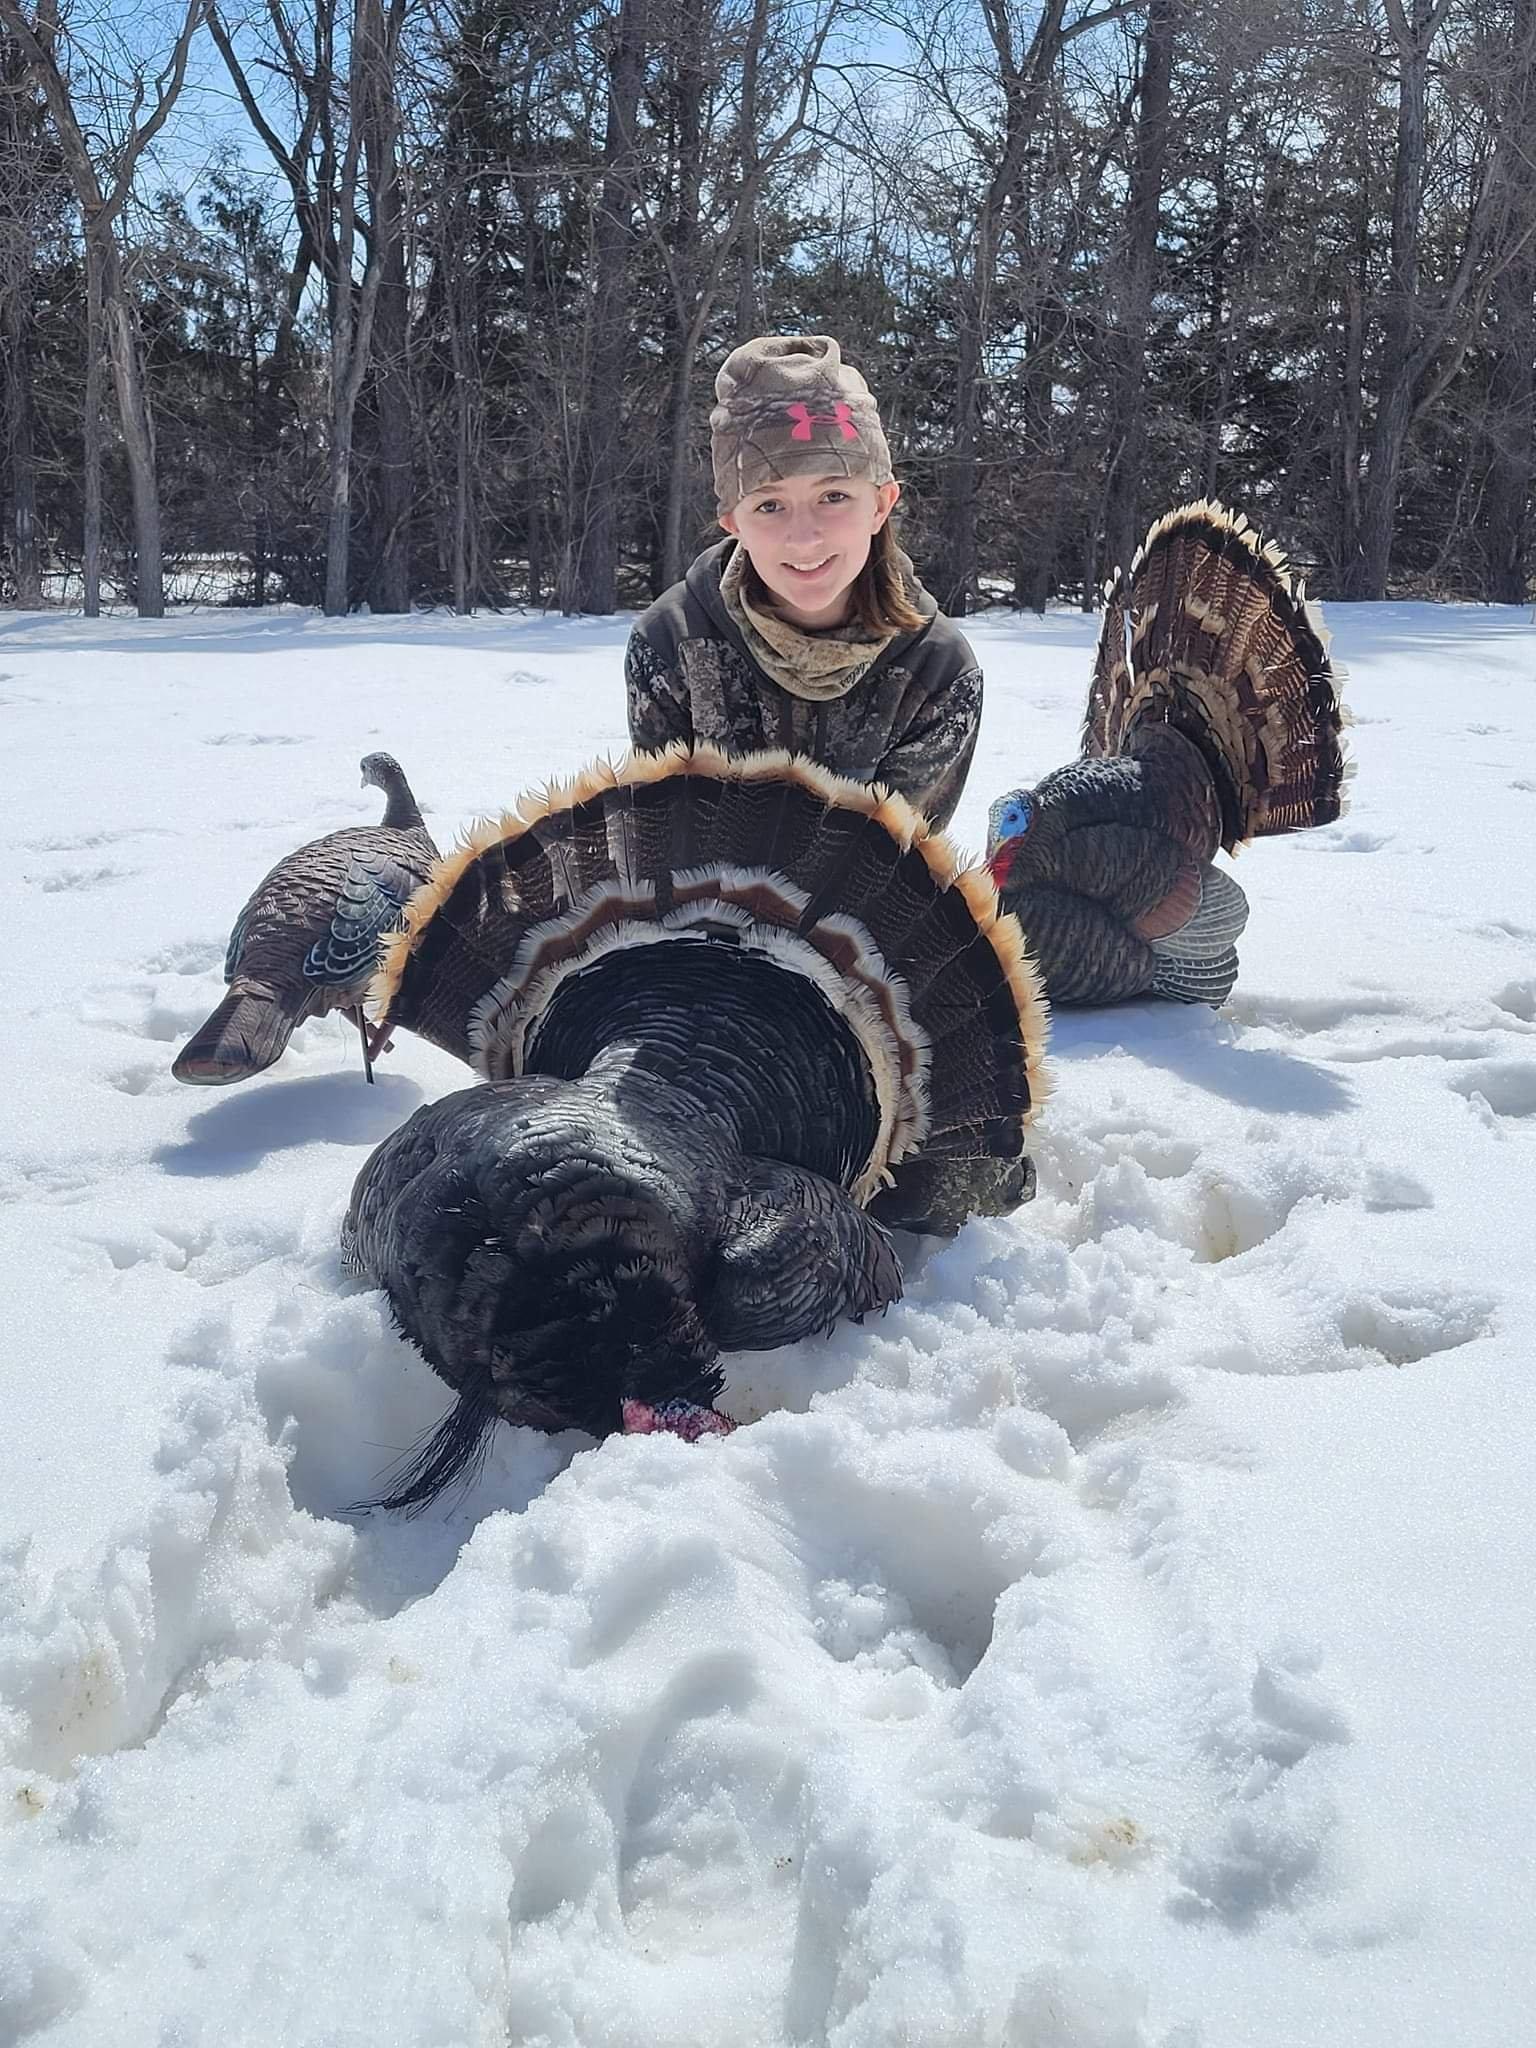 Eleven-year-old Keira Harnois hunted in South Dakota with her father, Thomas, and tagged this triple-bearded gobbler. Image by Thomas Harnois